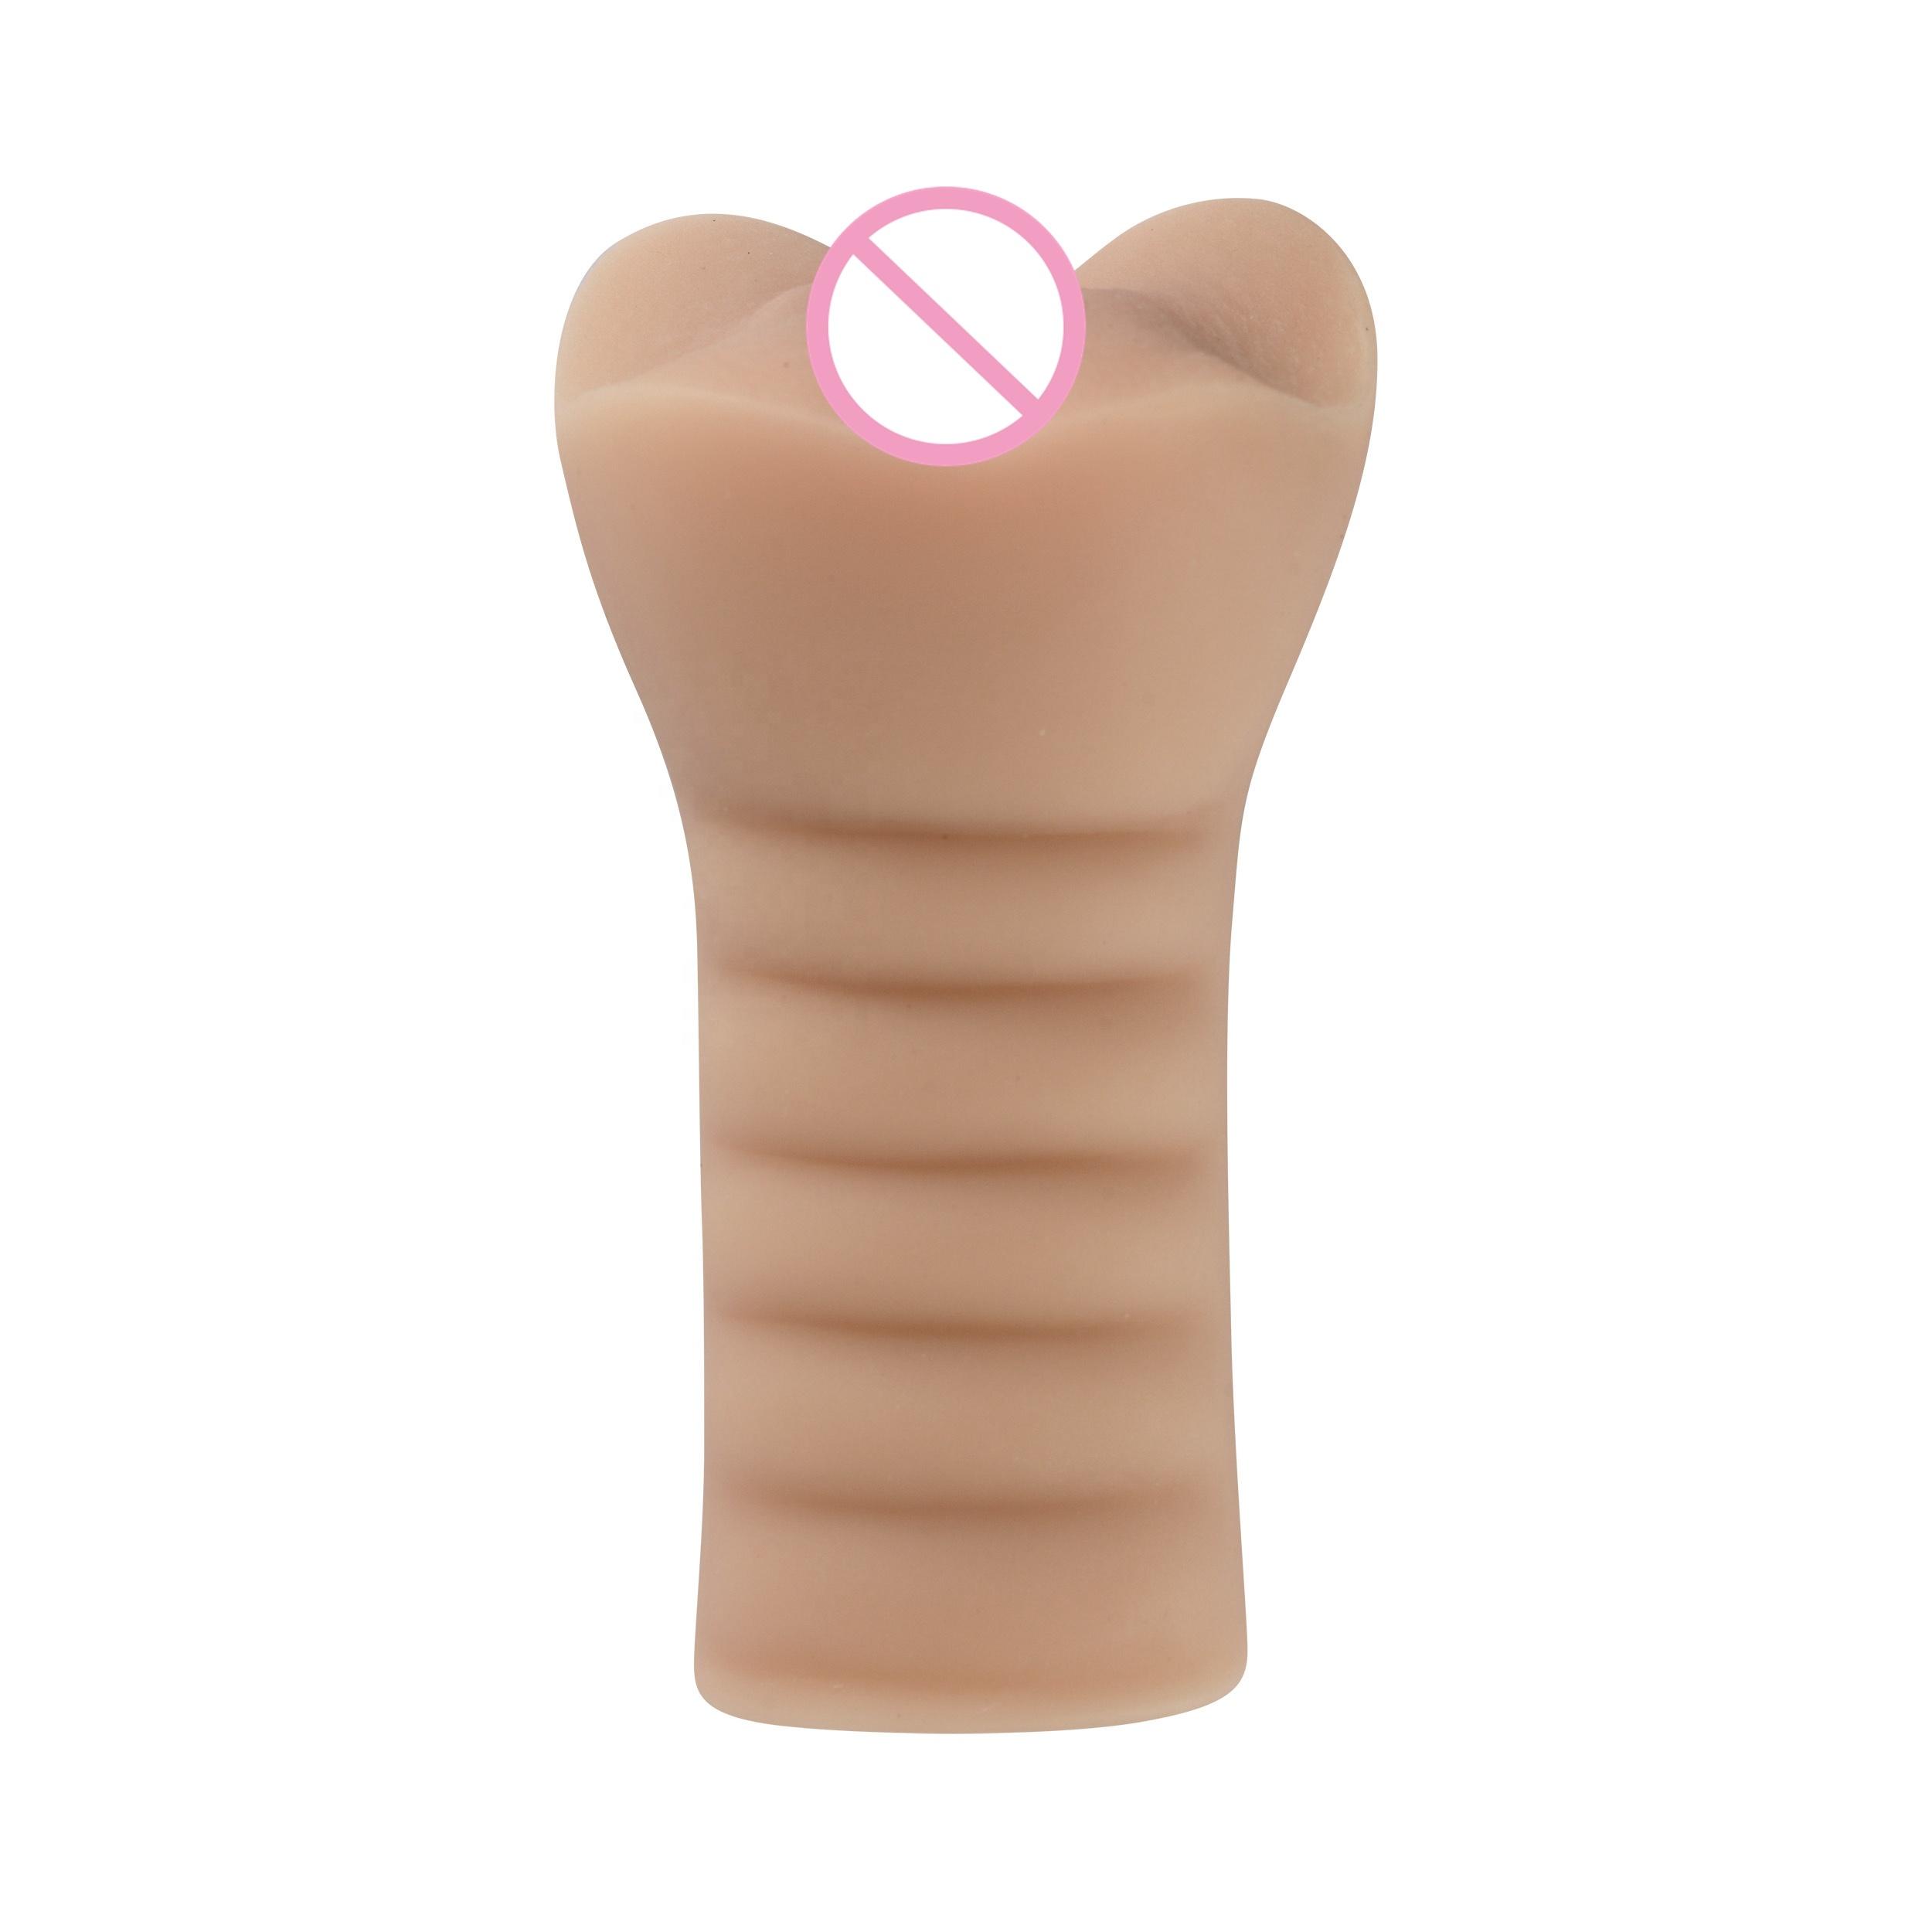  Mini Soft Sex Doll With Realistic Textured Tight Anus And Mouth Vagina Masturbator Deep Throat Oral Adult Sex Toys For Men